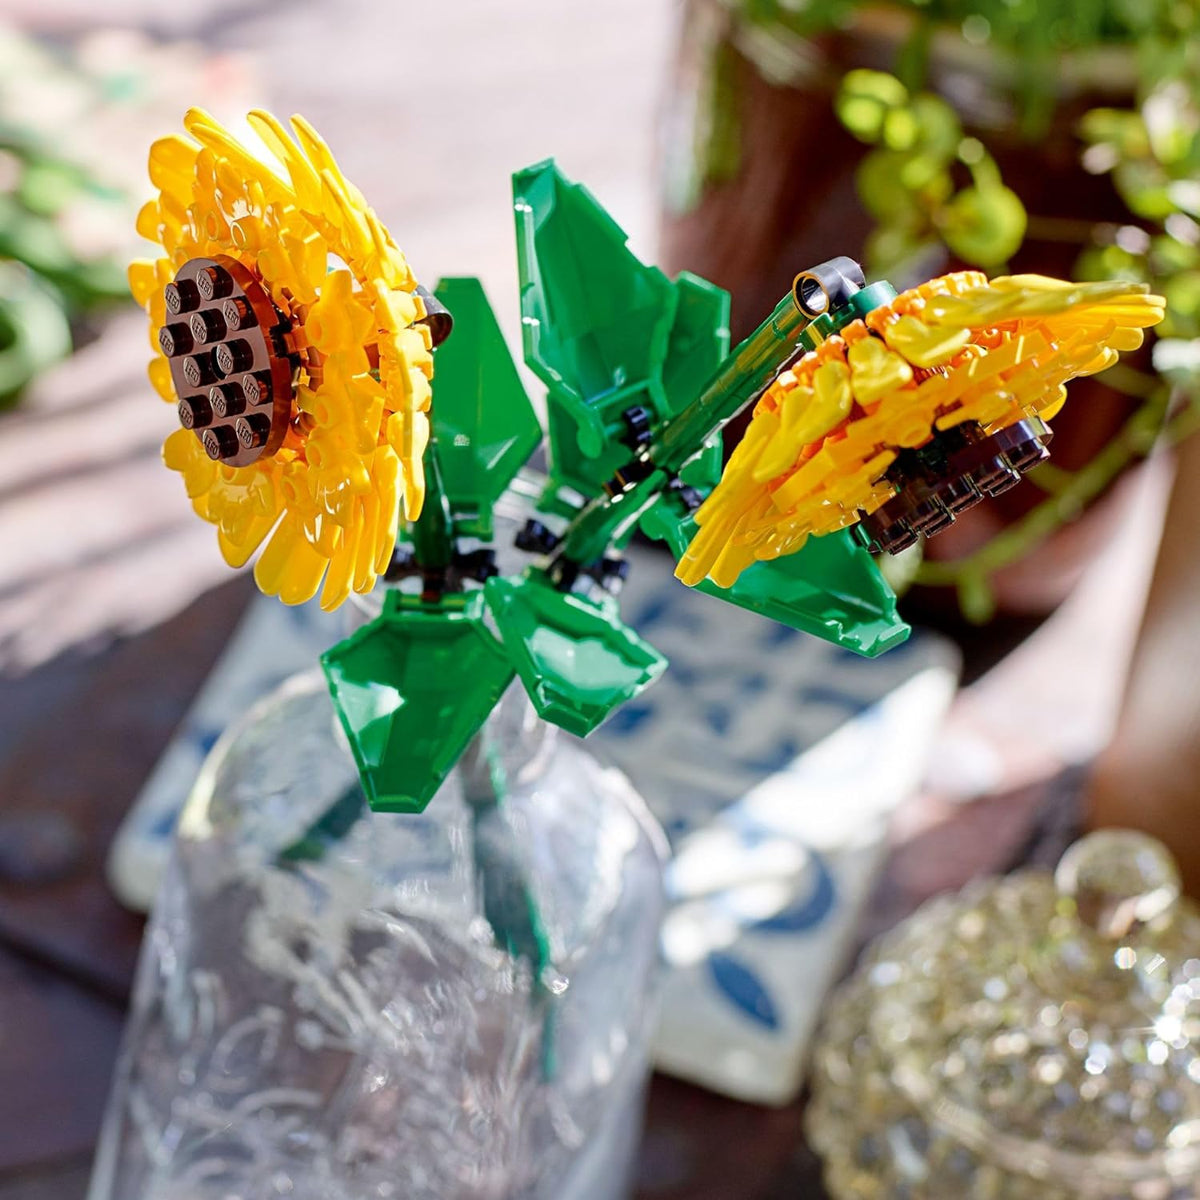 BOTANICAL COLLECTION 40524: Sunflowers